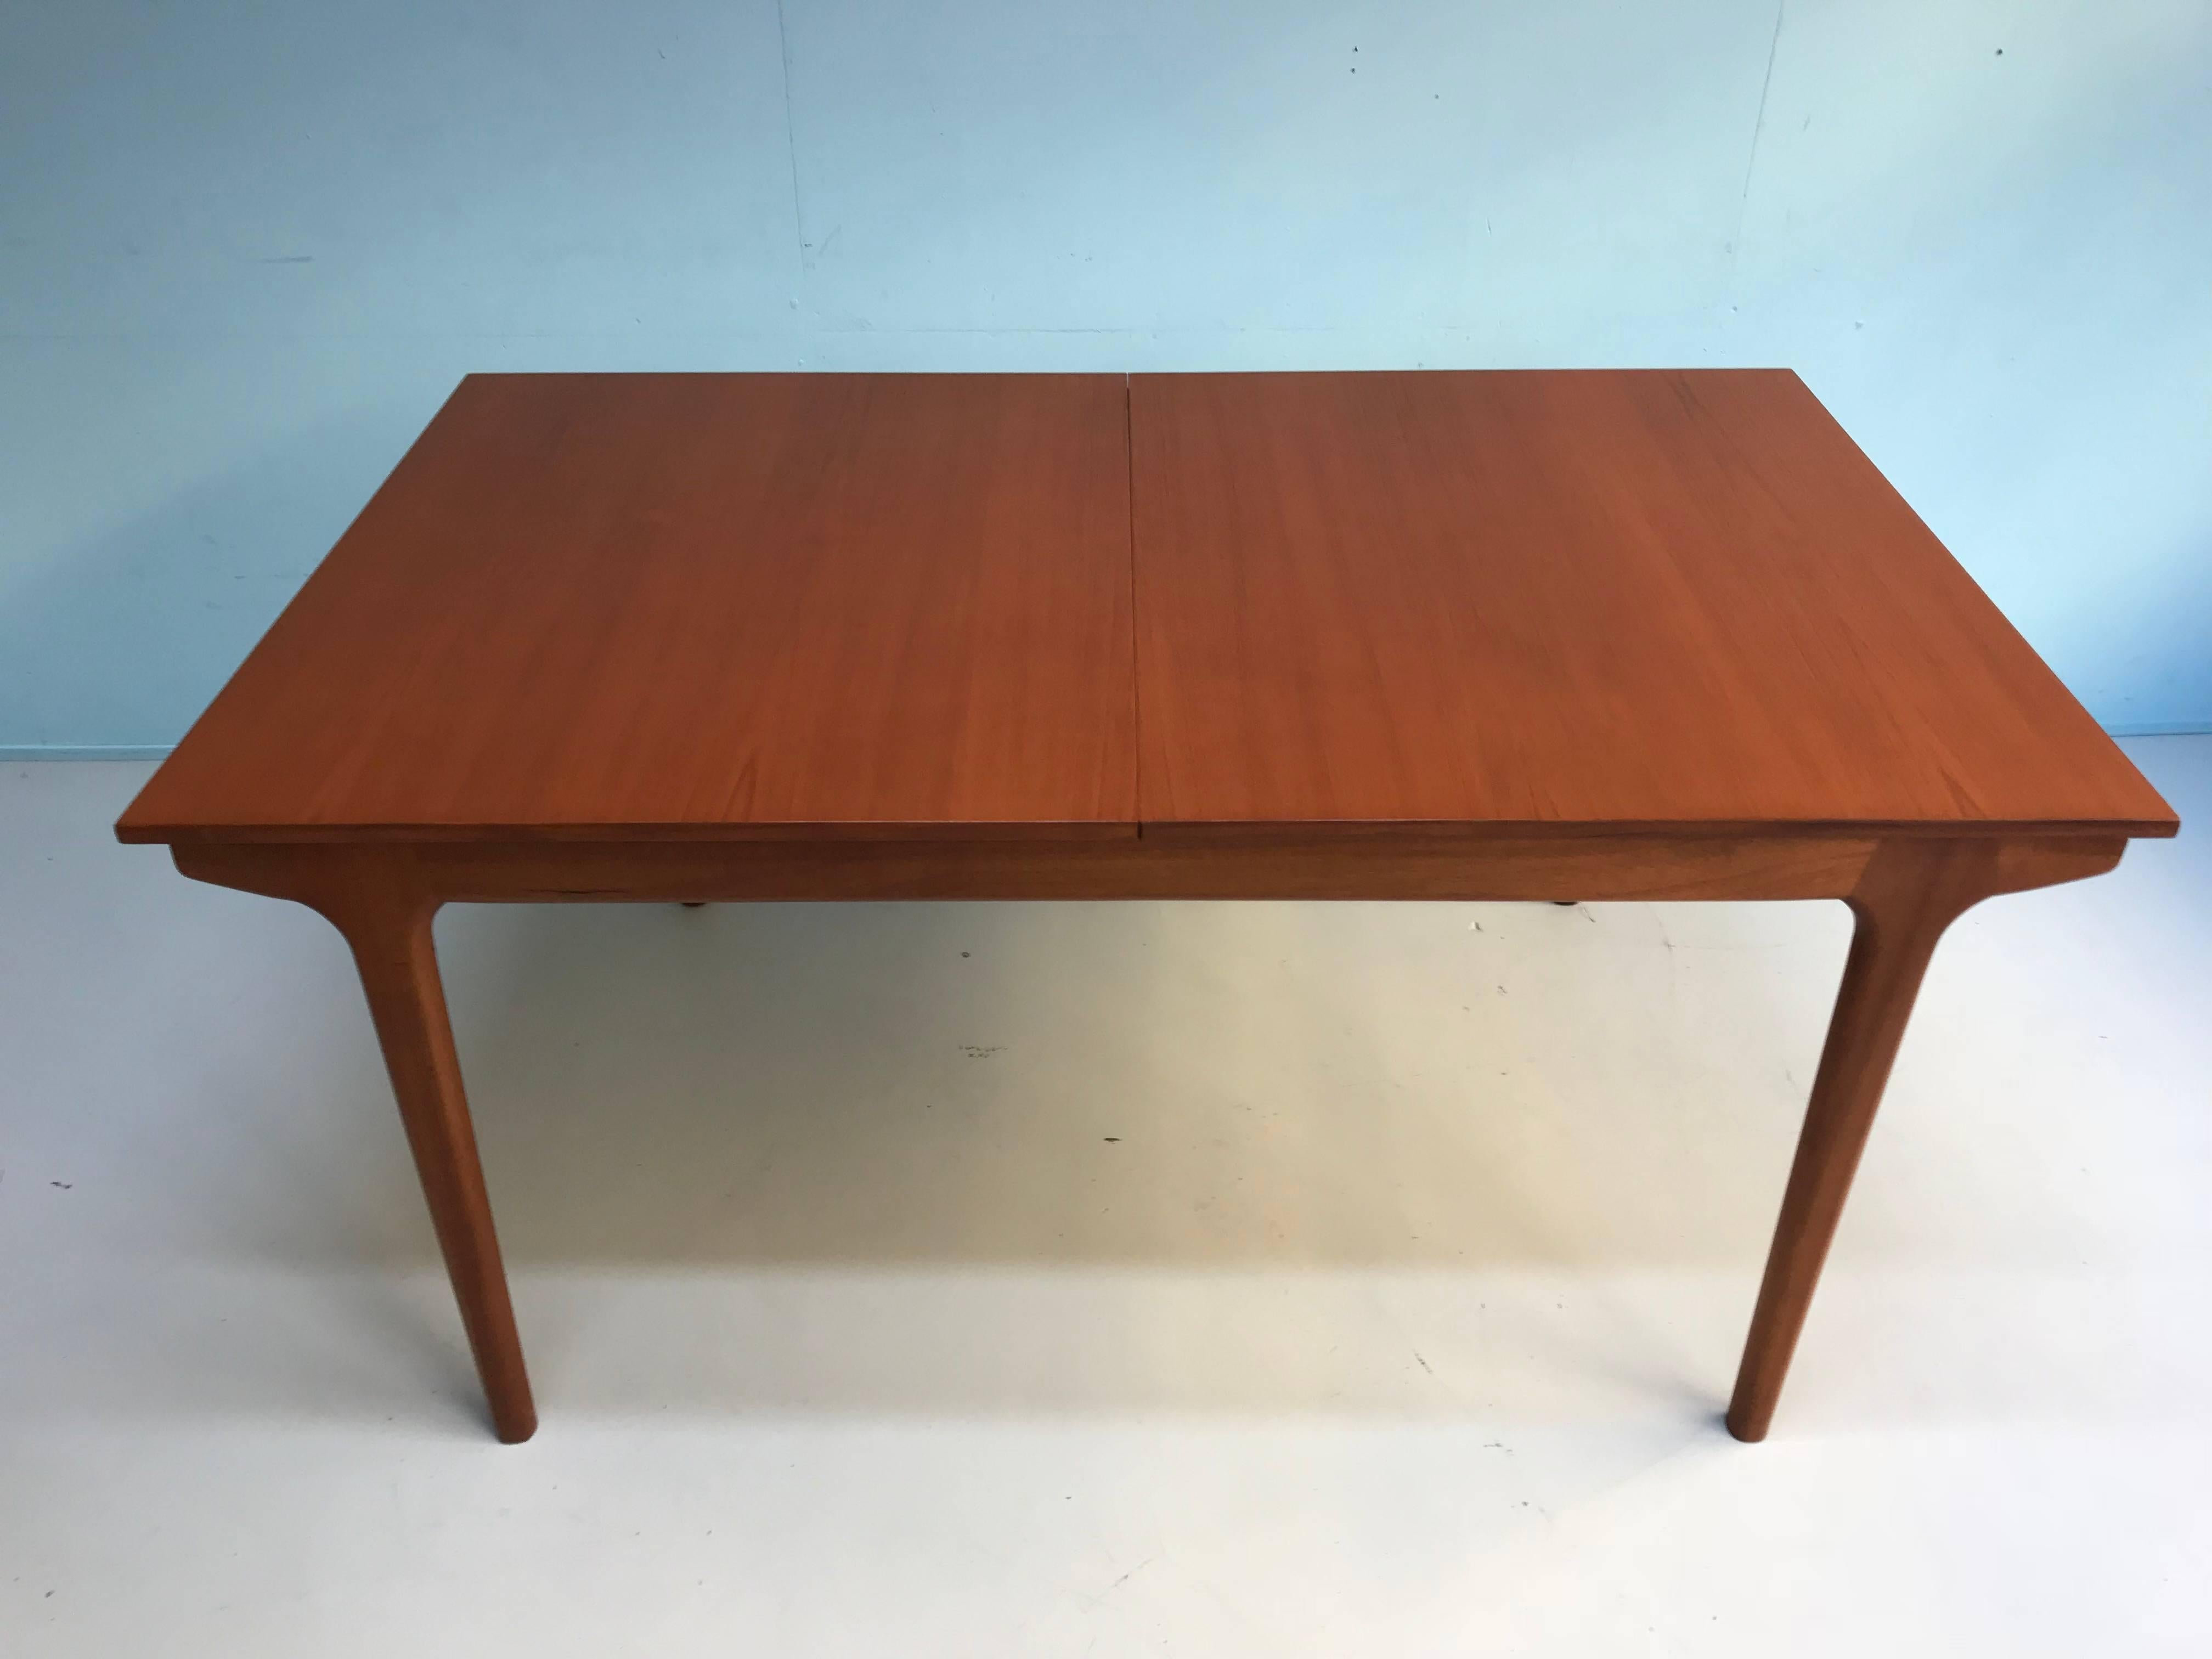 MacIntosh dining table made of teak in a good condition.
Very genius system to make the table longer in two steps.
Condition: very good
period: 1960s

Measurements:
Normal:
152 cm W, 91 cm D, 74 cm H
1 step :
190 cm W, 91cm D, 74 H
2